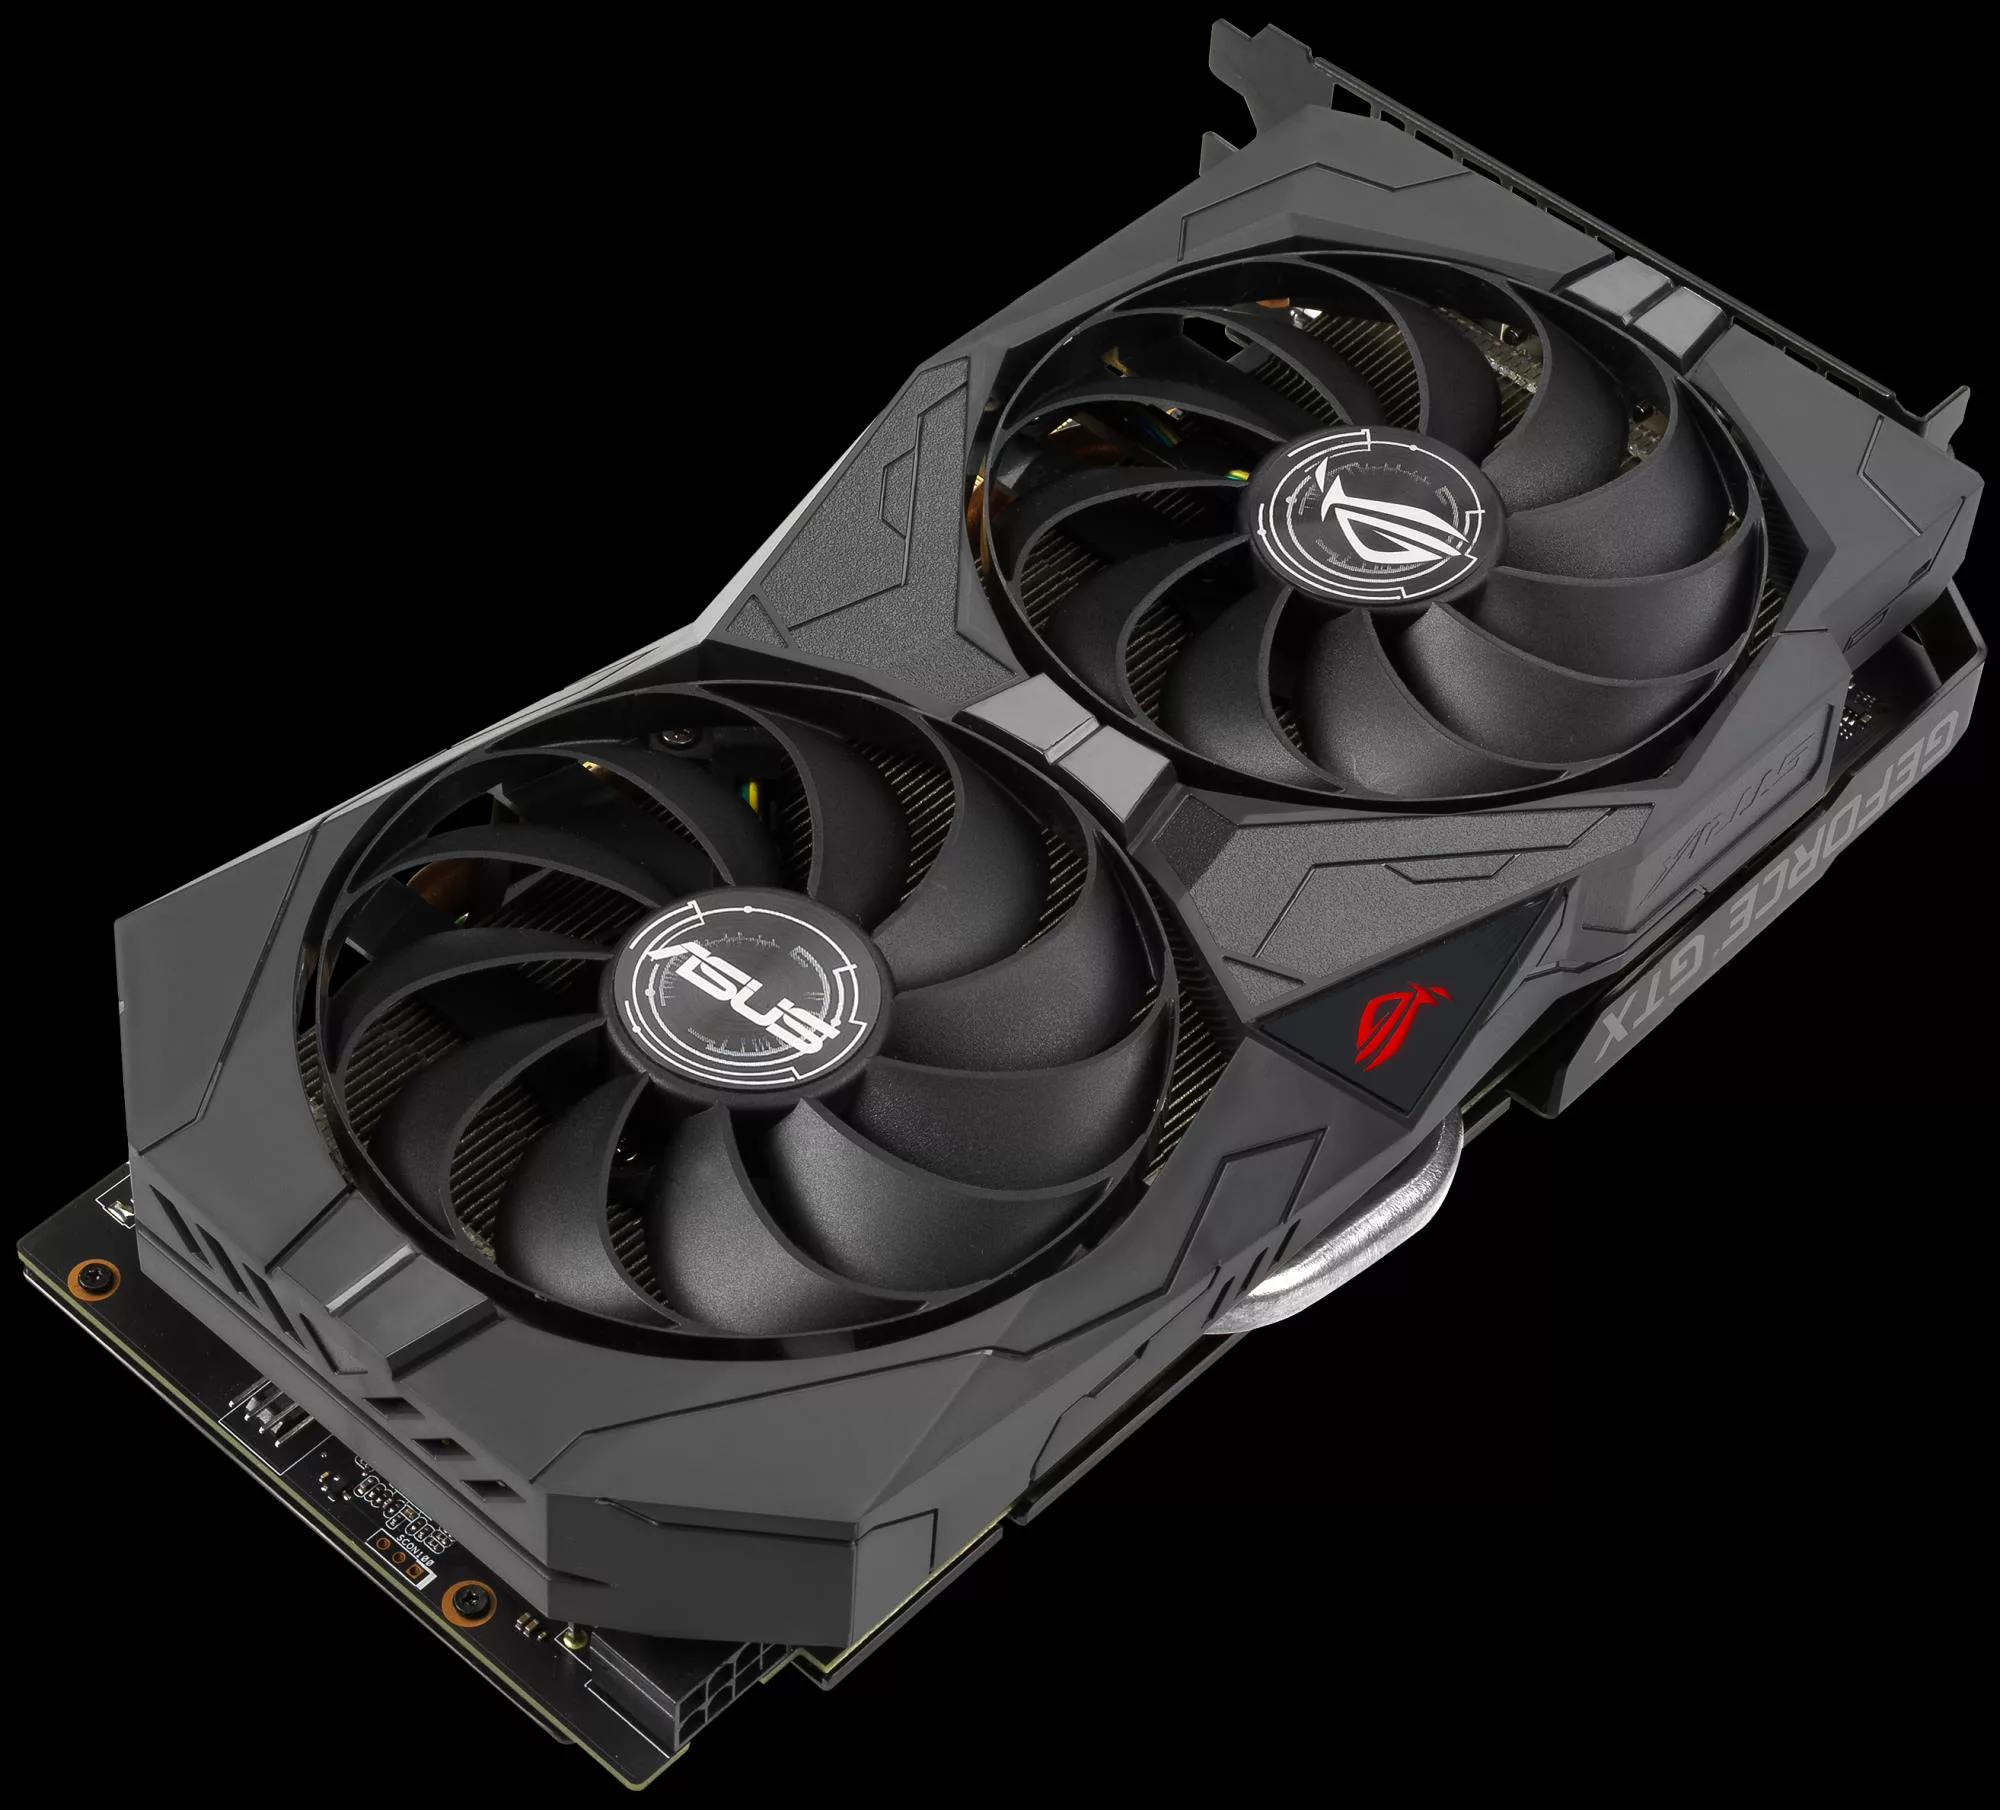 GeForce 1660 and GTX 1650 SUPER graphics cards from and ASUS up Full HD gaming | ROG - Republic of Gamers USA